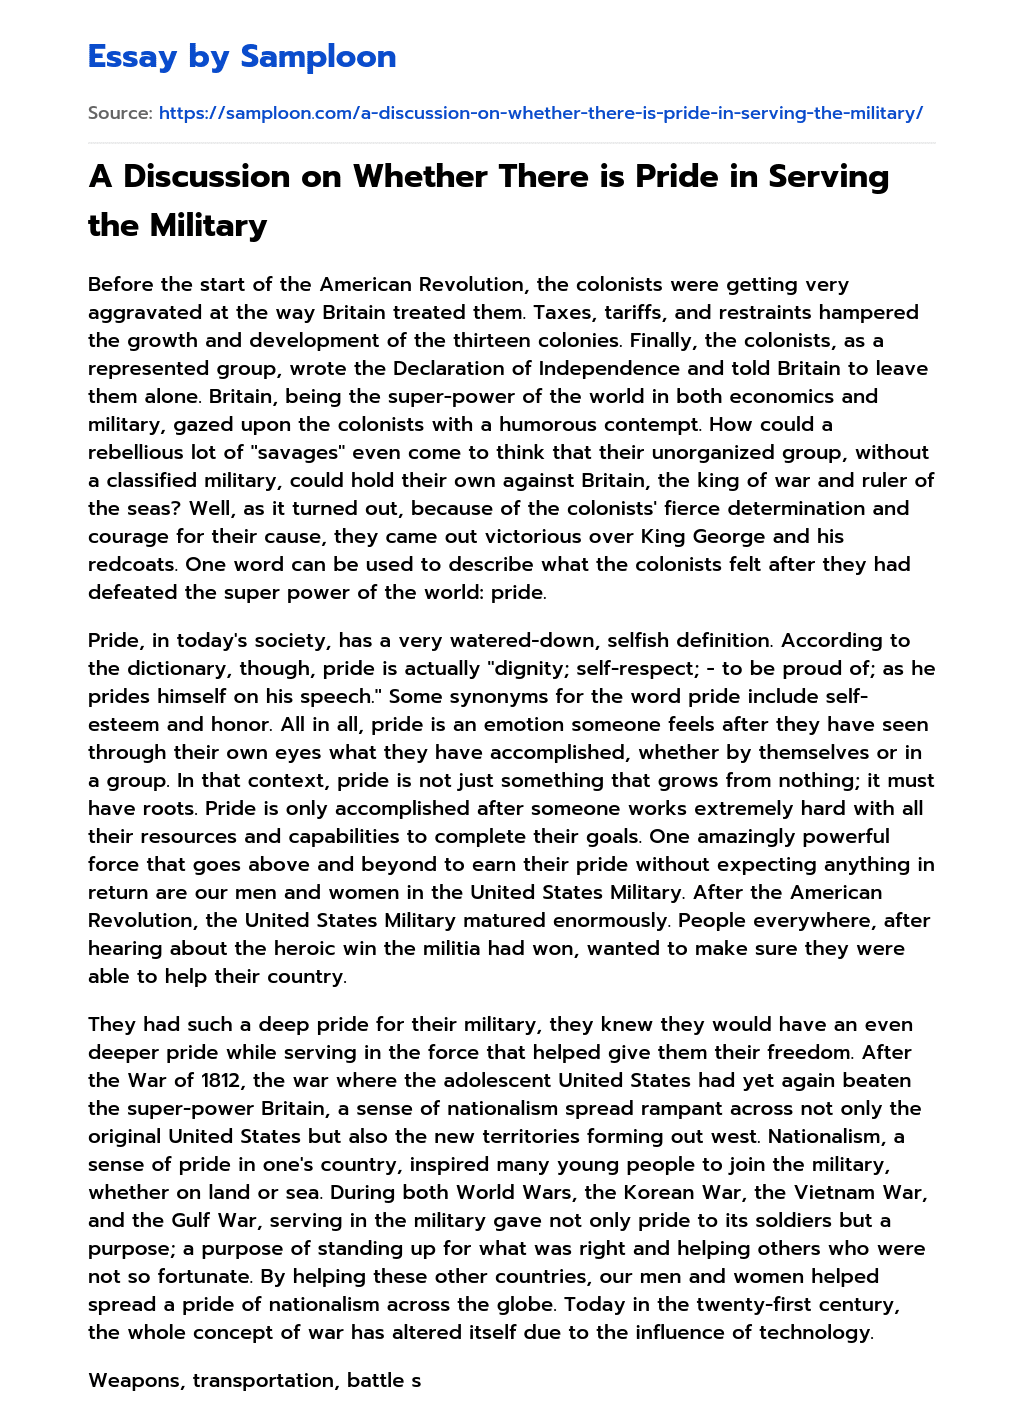 A Discussion on Whether There is Pride in Serving the Military essay